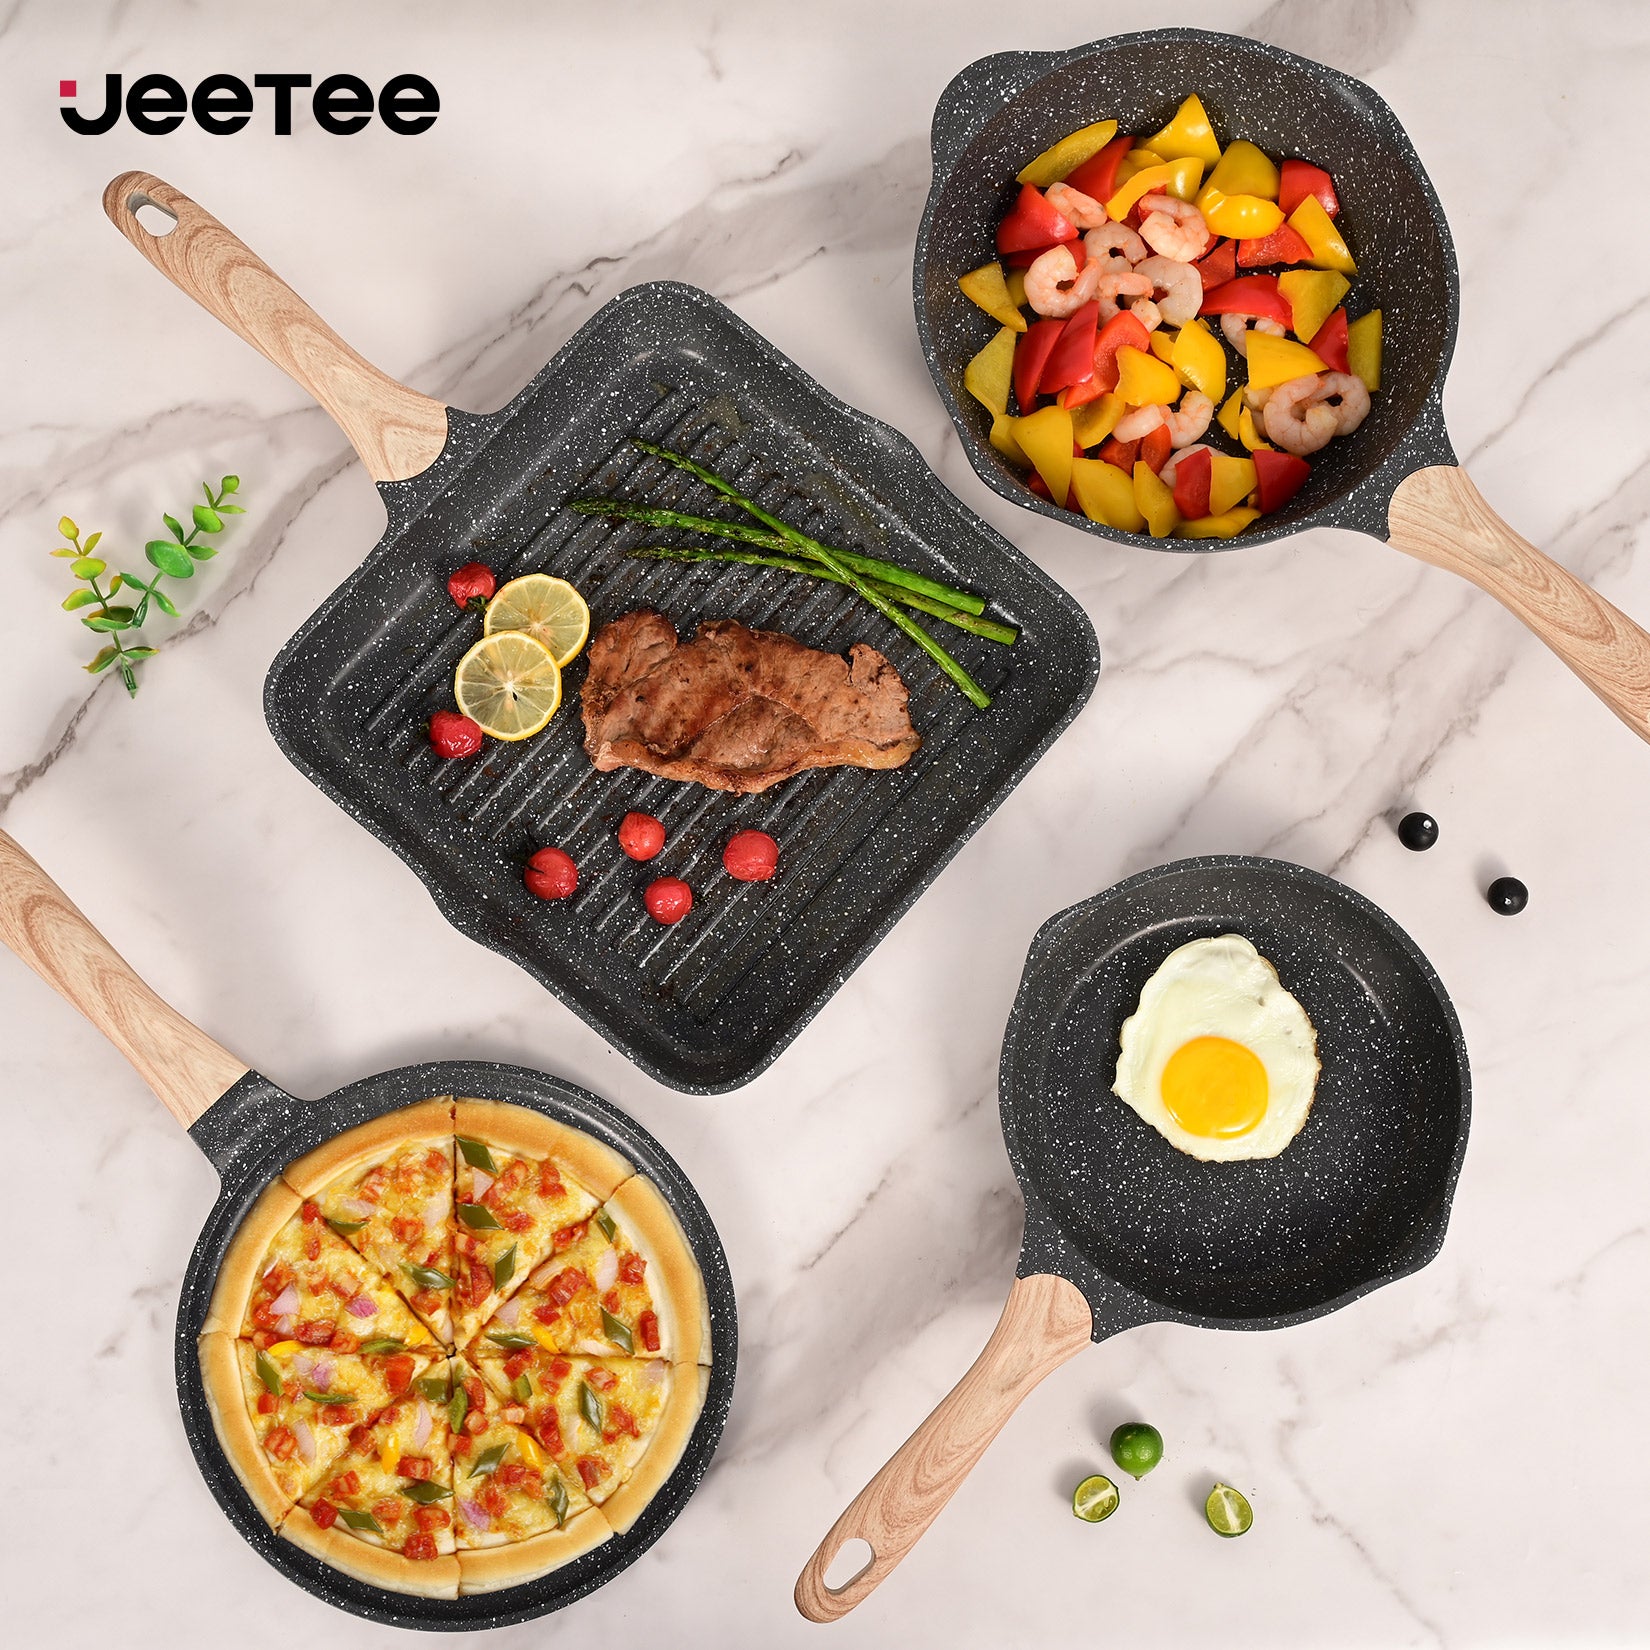  JEETEE Ceramic Cookware Set, White Pots and Pans Set